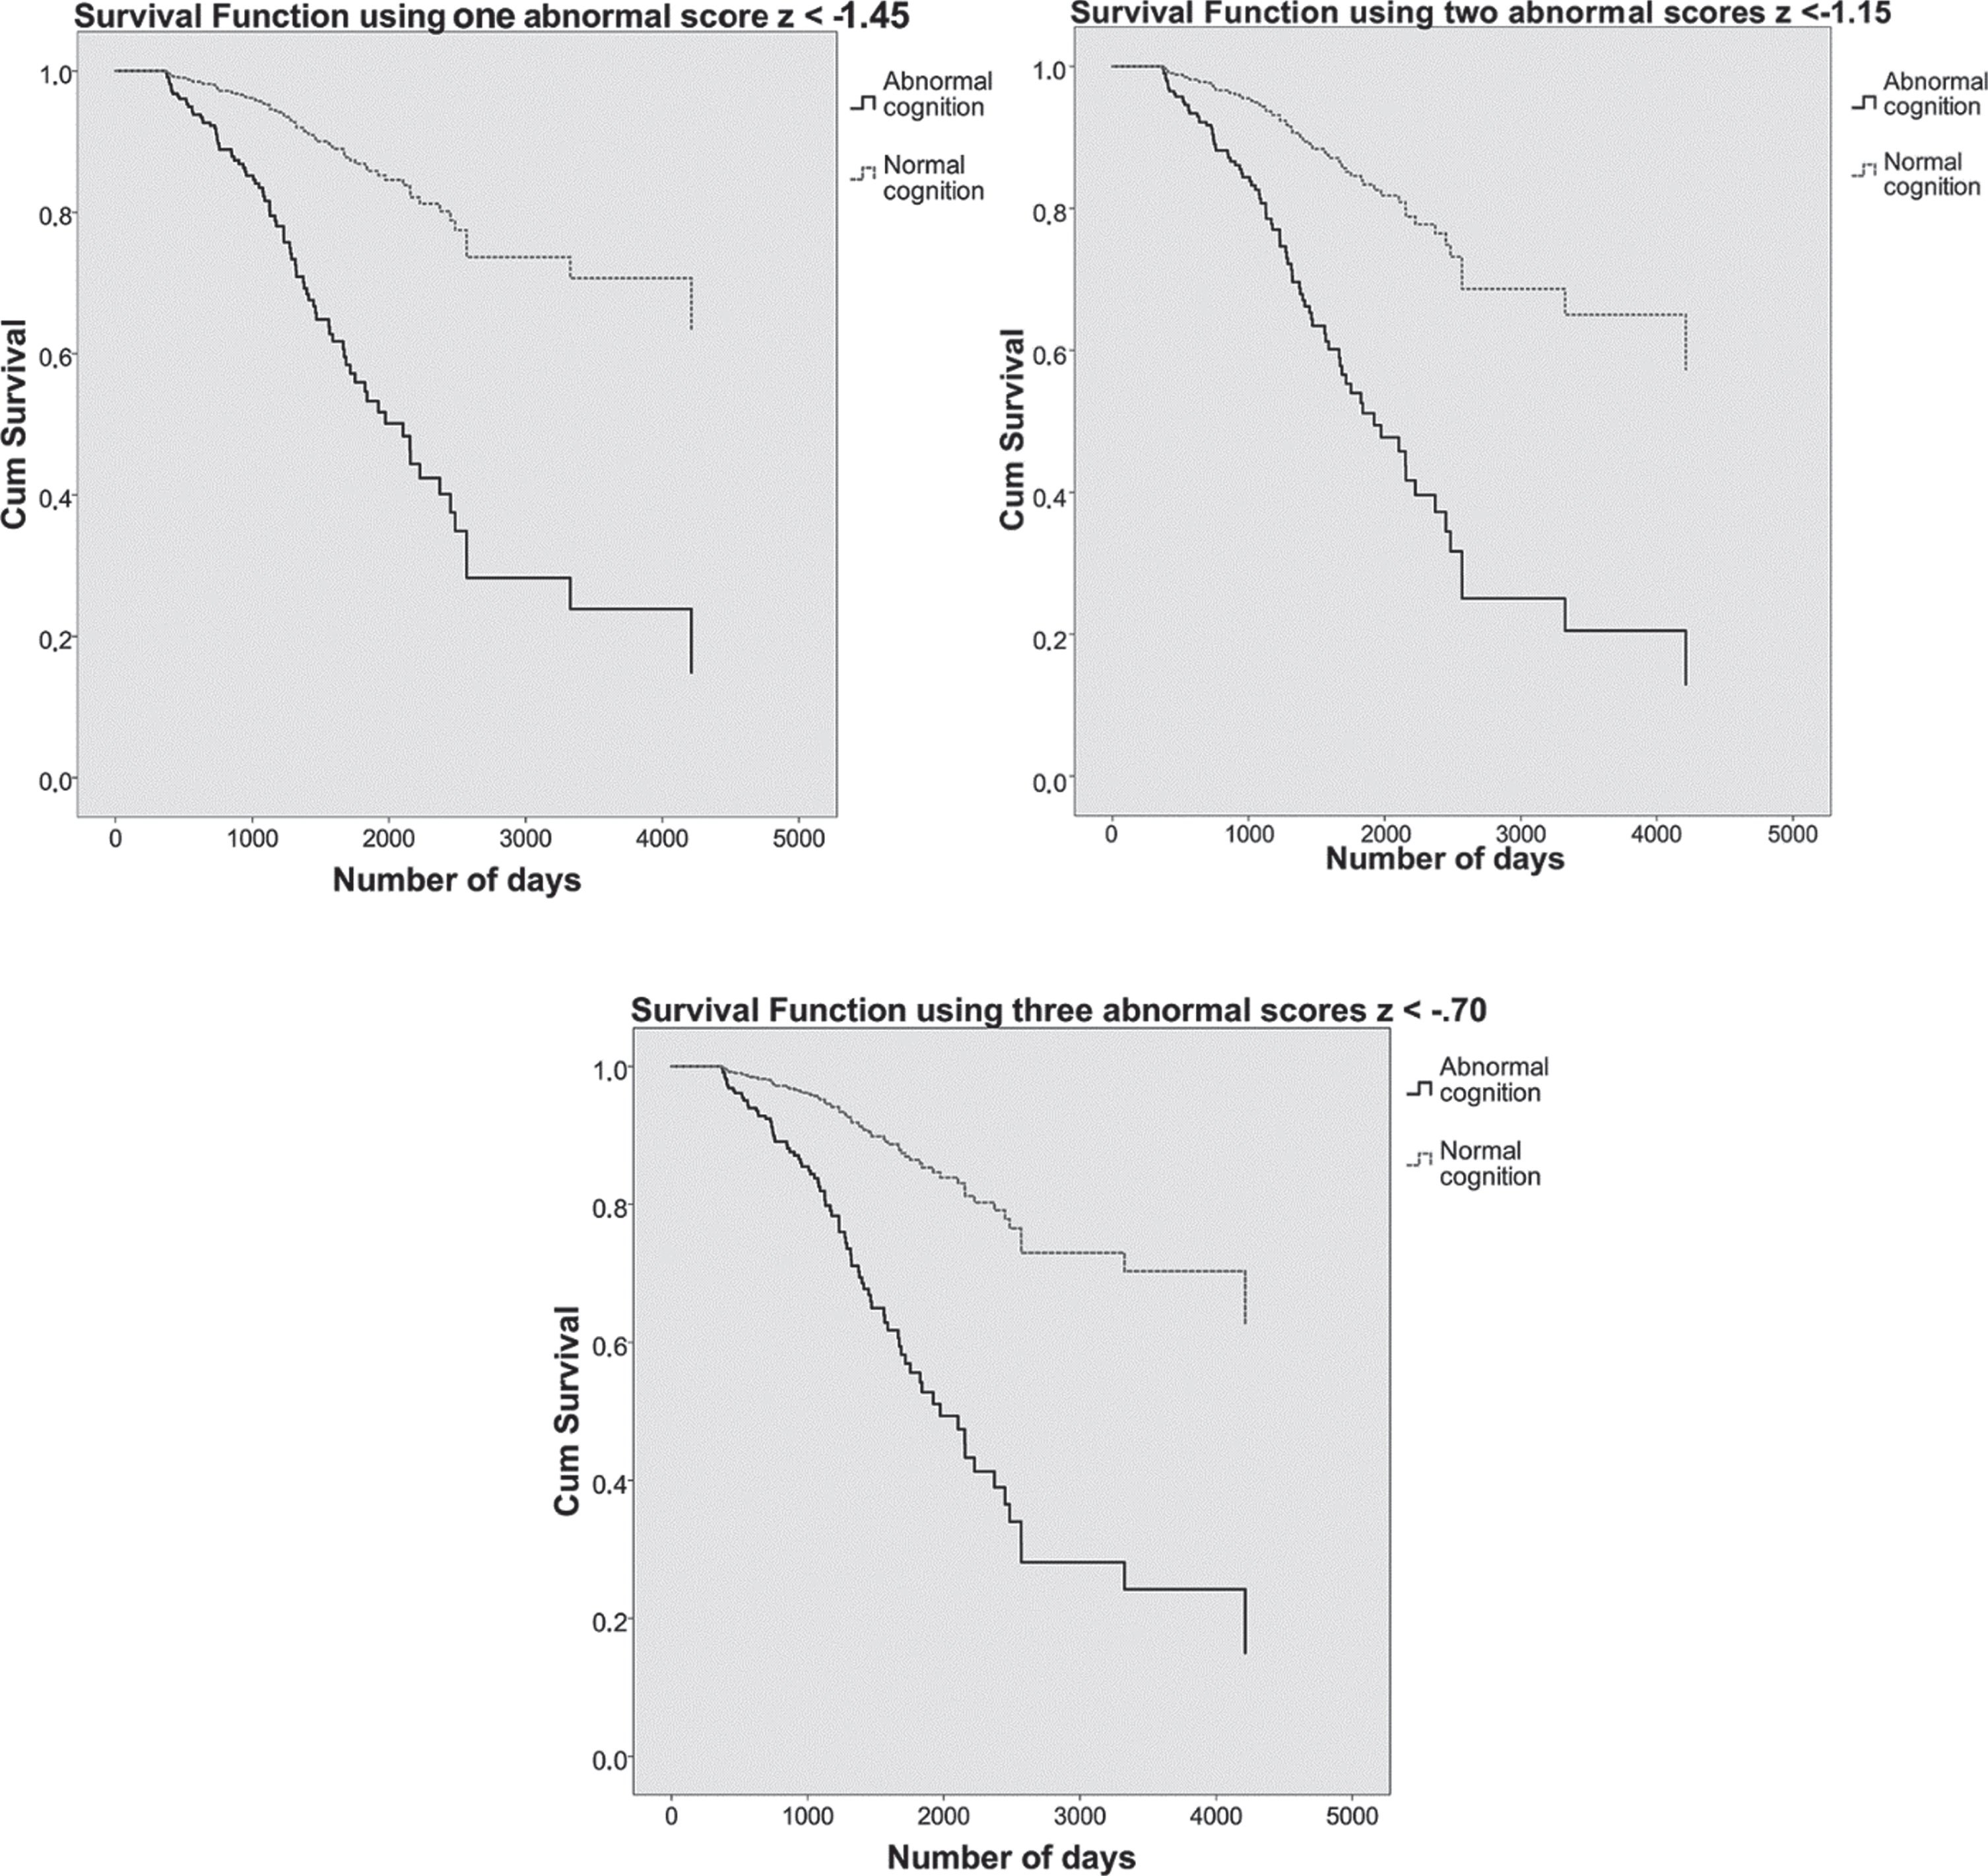 On the top left, the survival curves using one abnormal score of z < –1.45 are plotted. On the top right, the survival curves using two abnormal scores of z < –1.15. Below, the survival curves using three abnormal scores of z < –0.70. Patients with normal cognition are shown in dashed grey lines and patients with abnormal cognition in solid black lines. The y-axis shows cumulative (dementia free) survival across time, number of days participated is plotted on the x-axis.